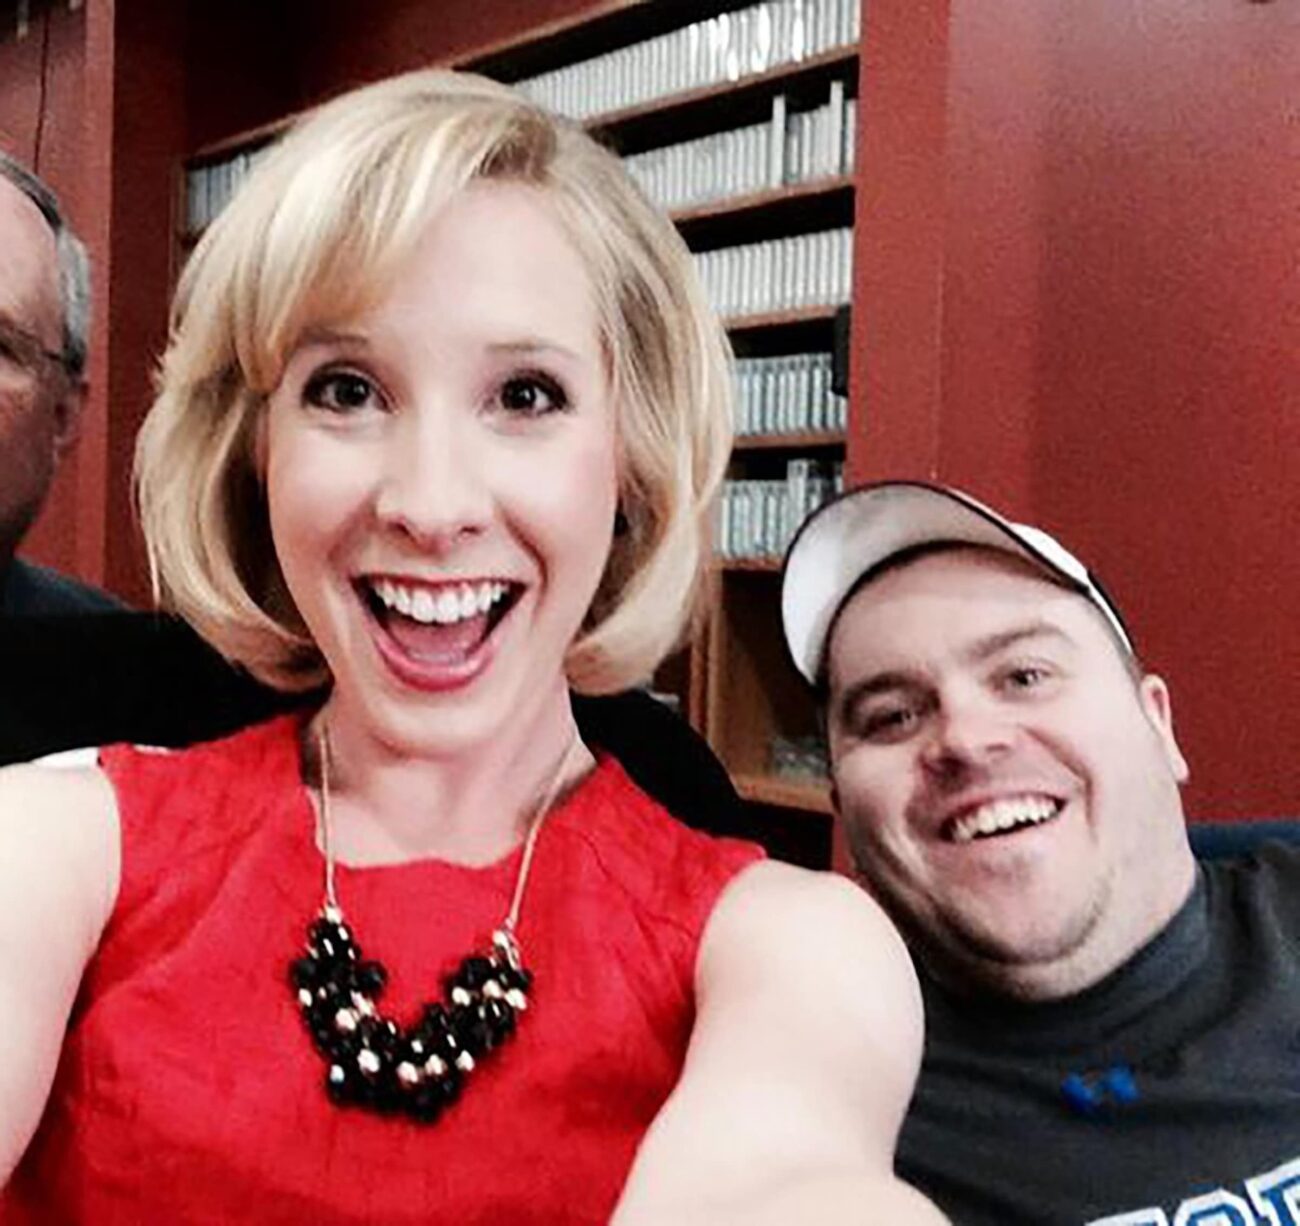 In 2015, reporter Alison Parker and cameraman Adam Ward were shot & killed on live television. Now, her father is suing Facebook for keeping the footage.